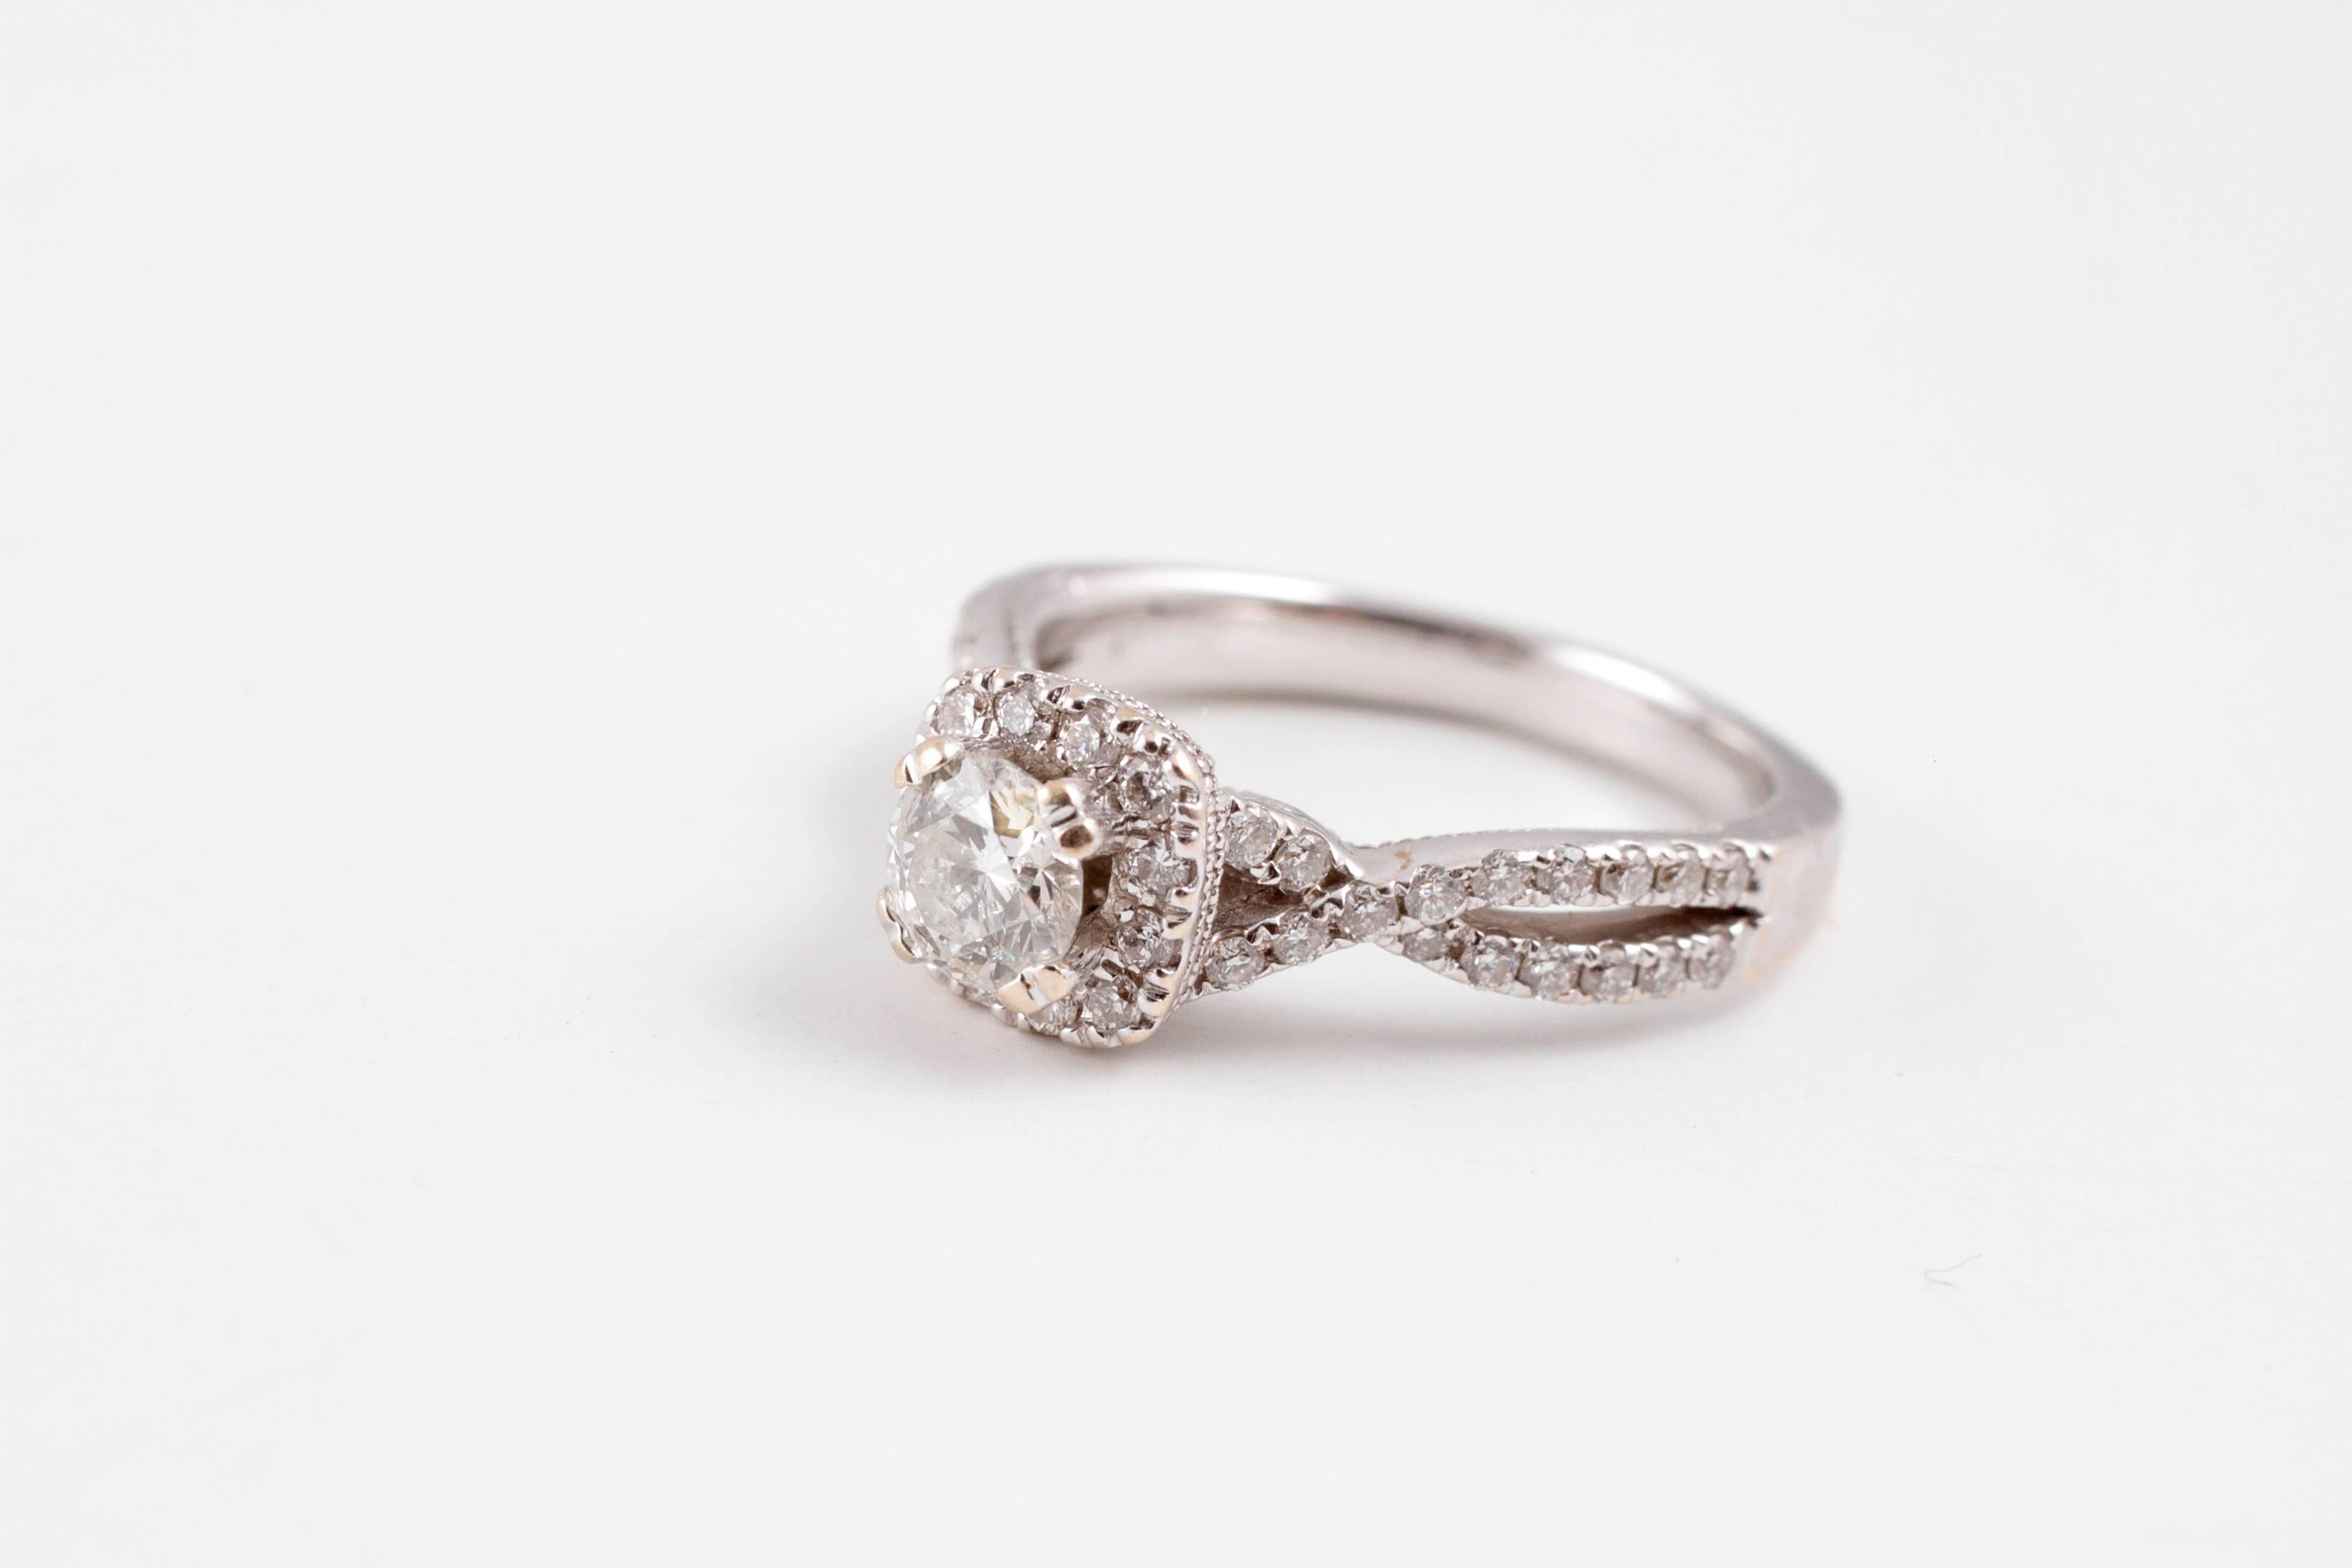 Such a lovely ring!  By Demetrios in 14 karat white gold with 1.00 carat of diamonds
Size 6.5